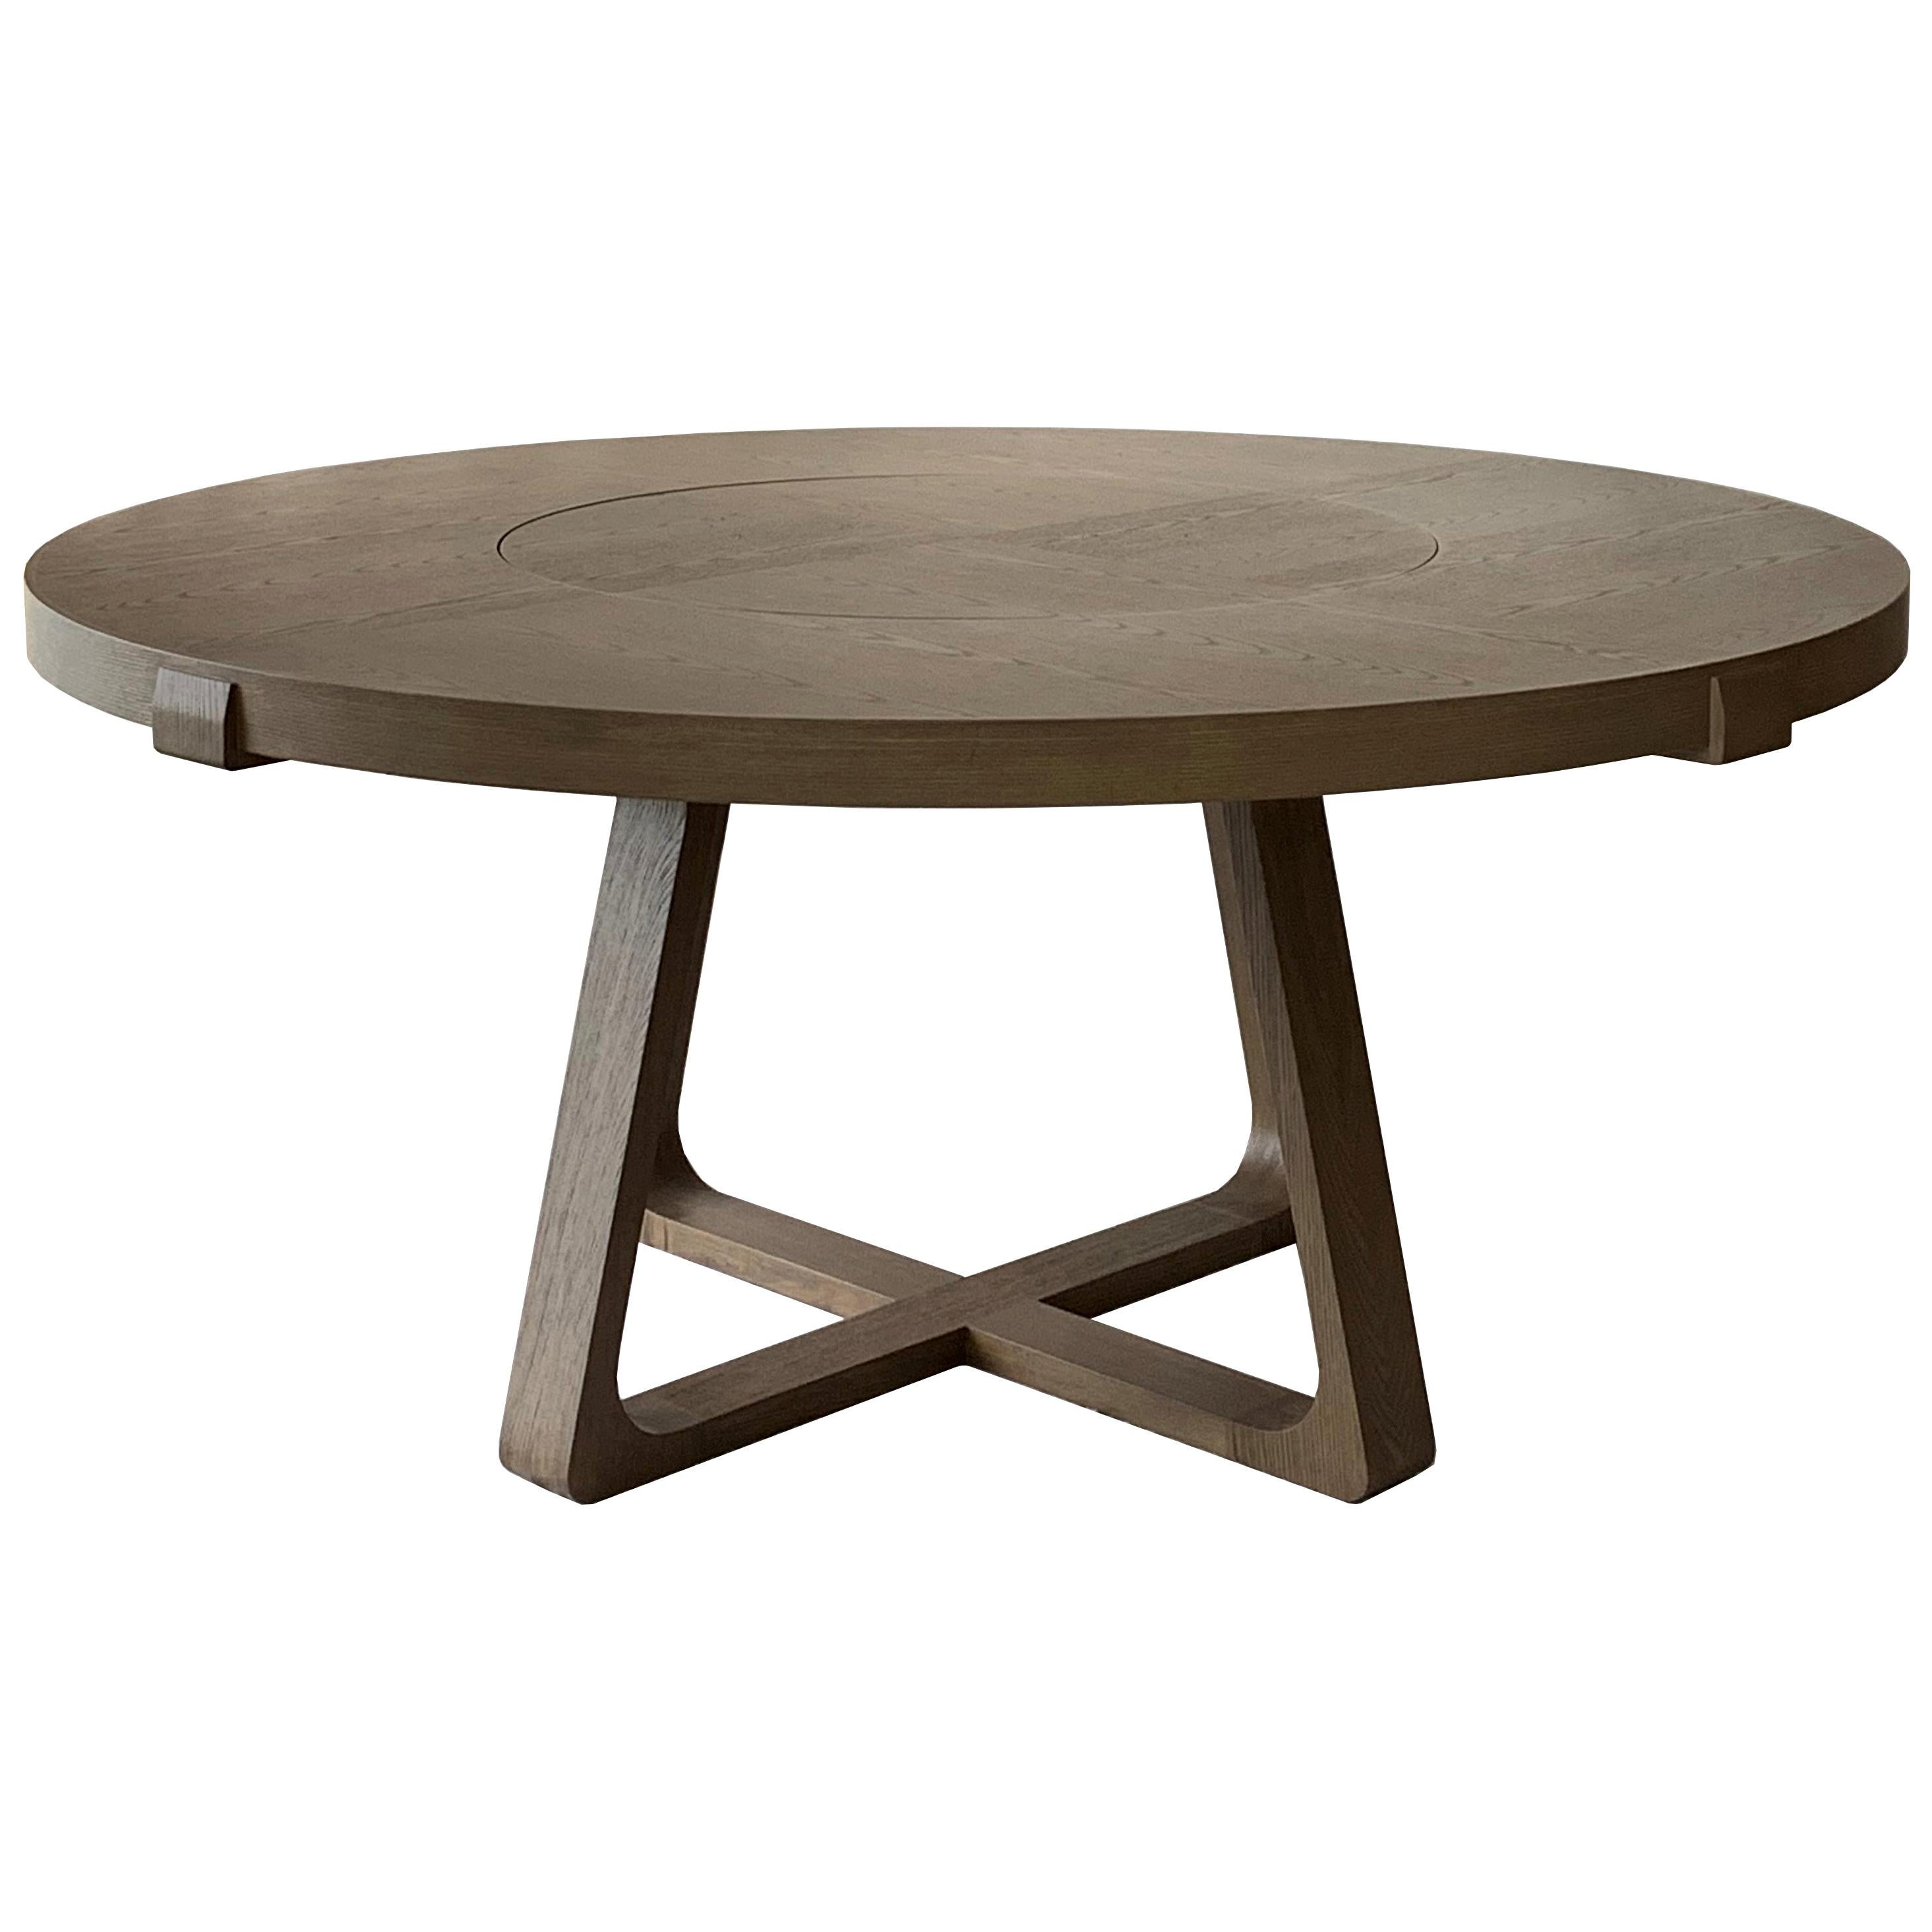 Round Dining Table With Lazy Susan 140cm Interlock André Fu Living Grey Oak New